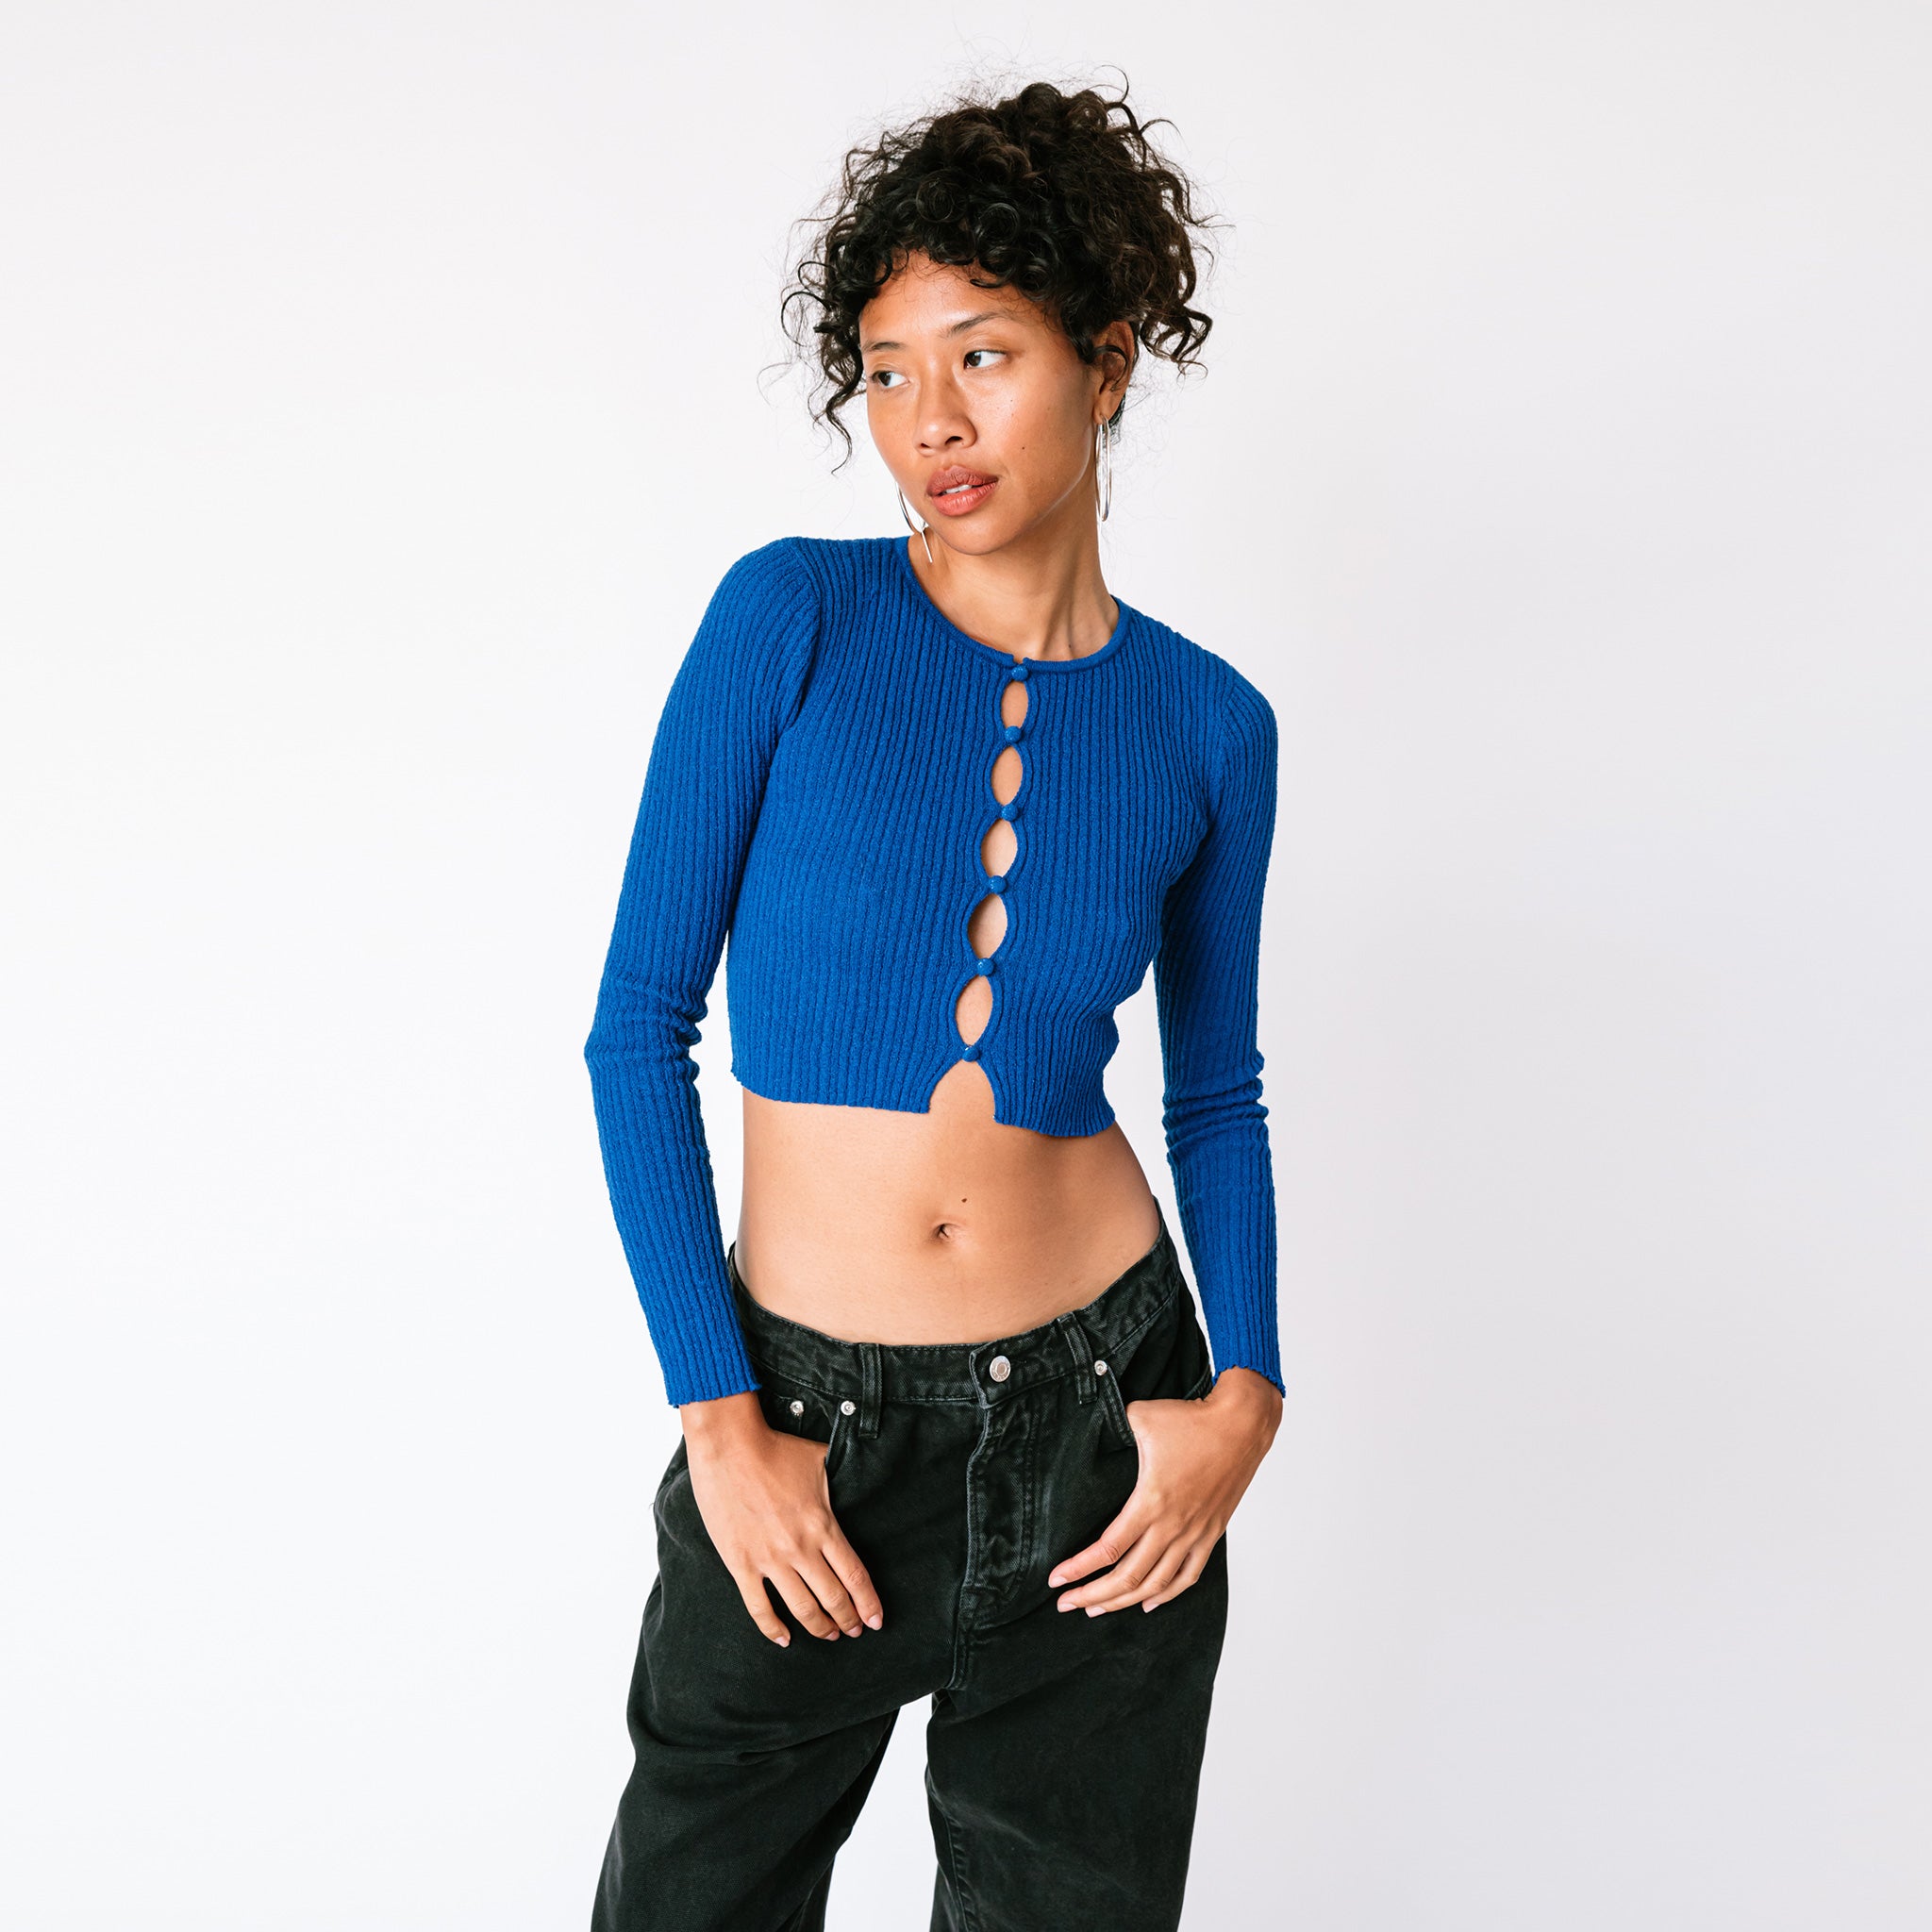 A model wears the electric blue cropped cardigan with multiple cutouts in a vertical line along the chest, paired with black jeans.